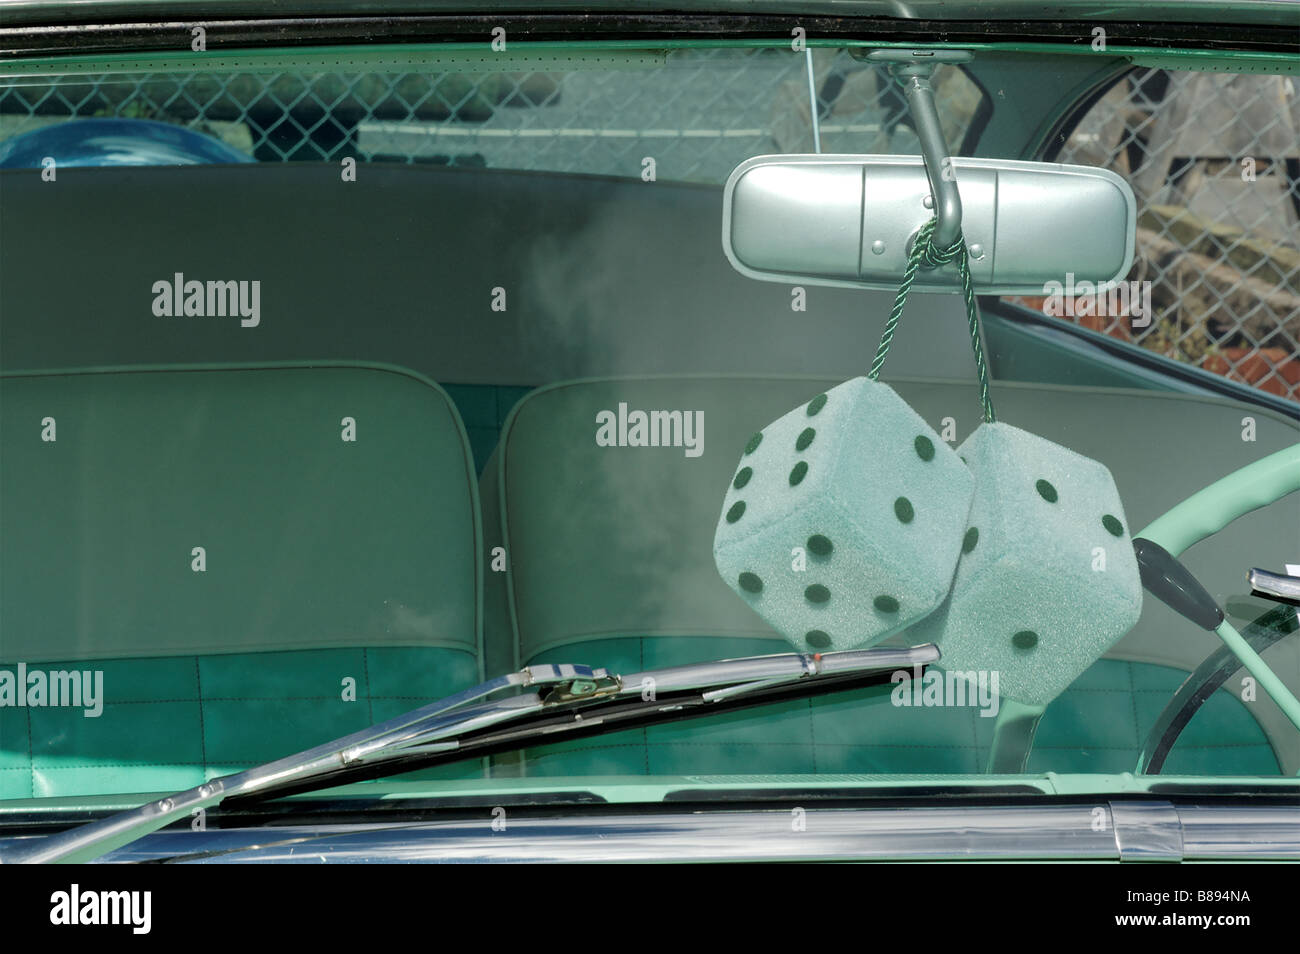 Furry dice in the window of a vintage Ford Fairlane 500 Stock Photo